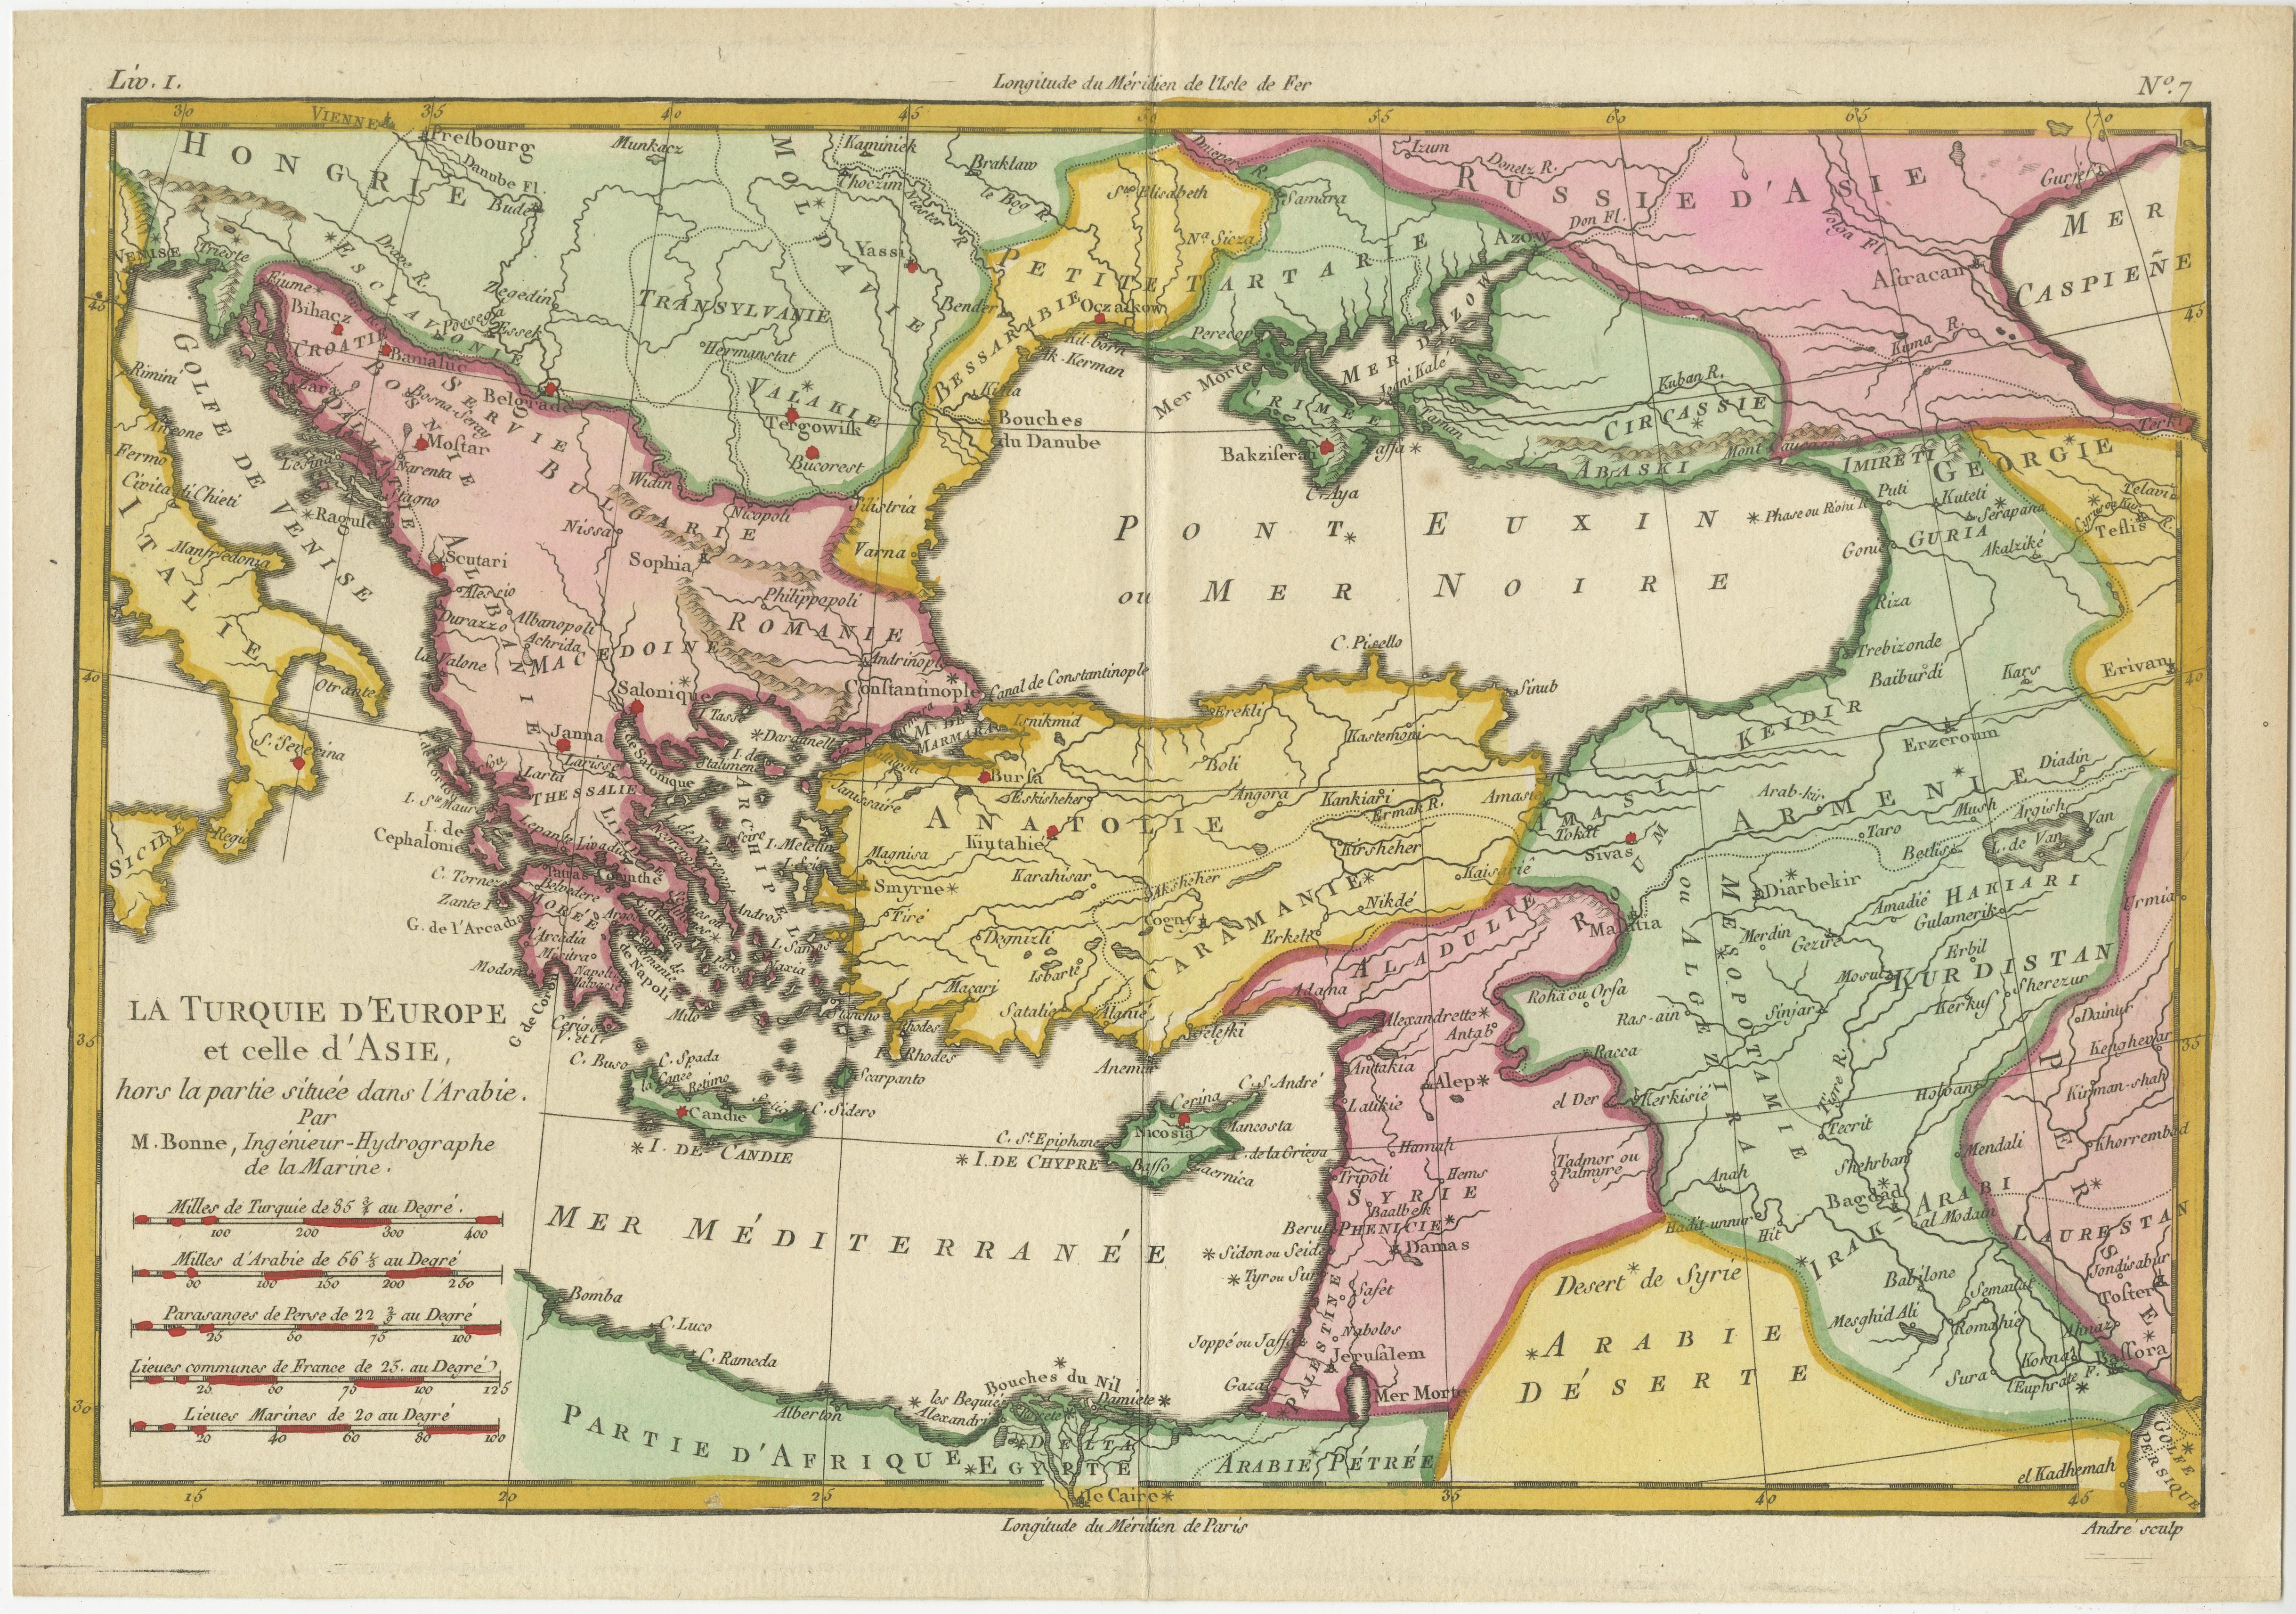 Antique map titled 'La Turquie d'Europe et celle d'Asie'. Attractive double page map of the Eastern Mediterranean and the Balkans by R. Bonne. Originates from 'Atlas de Toutes les Parties Connues du Globe Terrestre (..)' by Raynal. Published 1783.